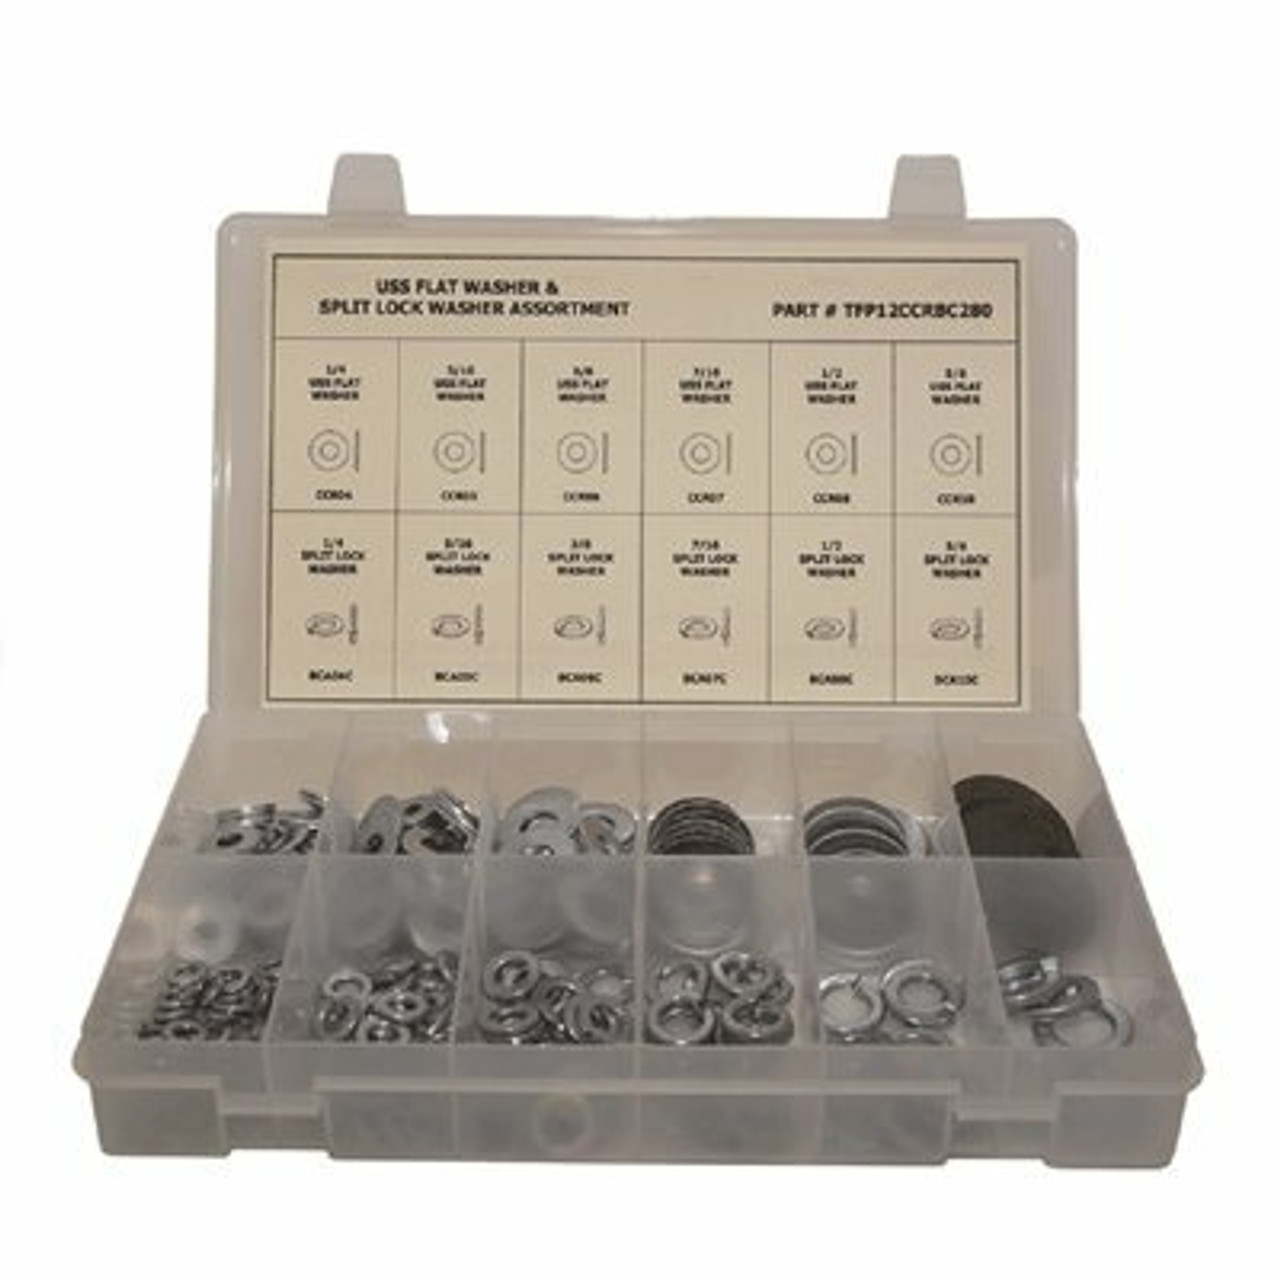 Grade 2 Uss Zinc Plated Assortment Flat Washer And Split Lock Washer In Plastic Carrying Case (280-Pieces)